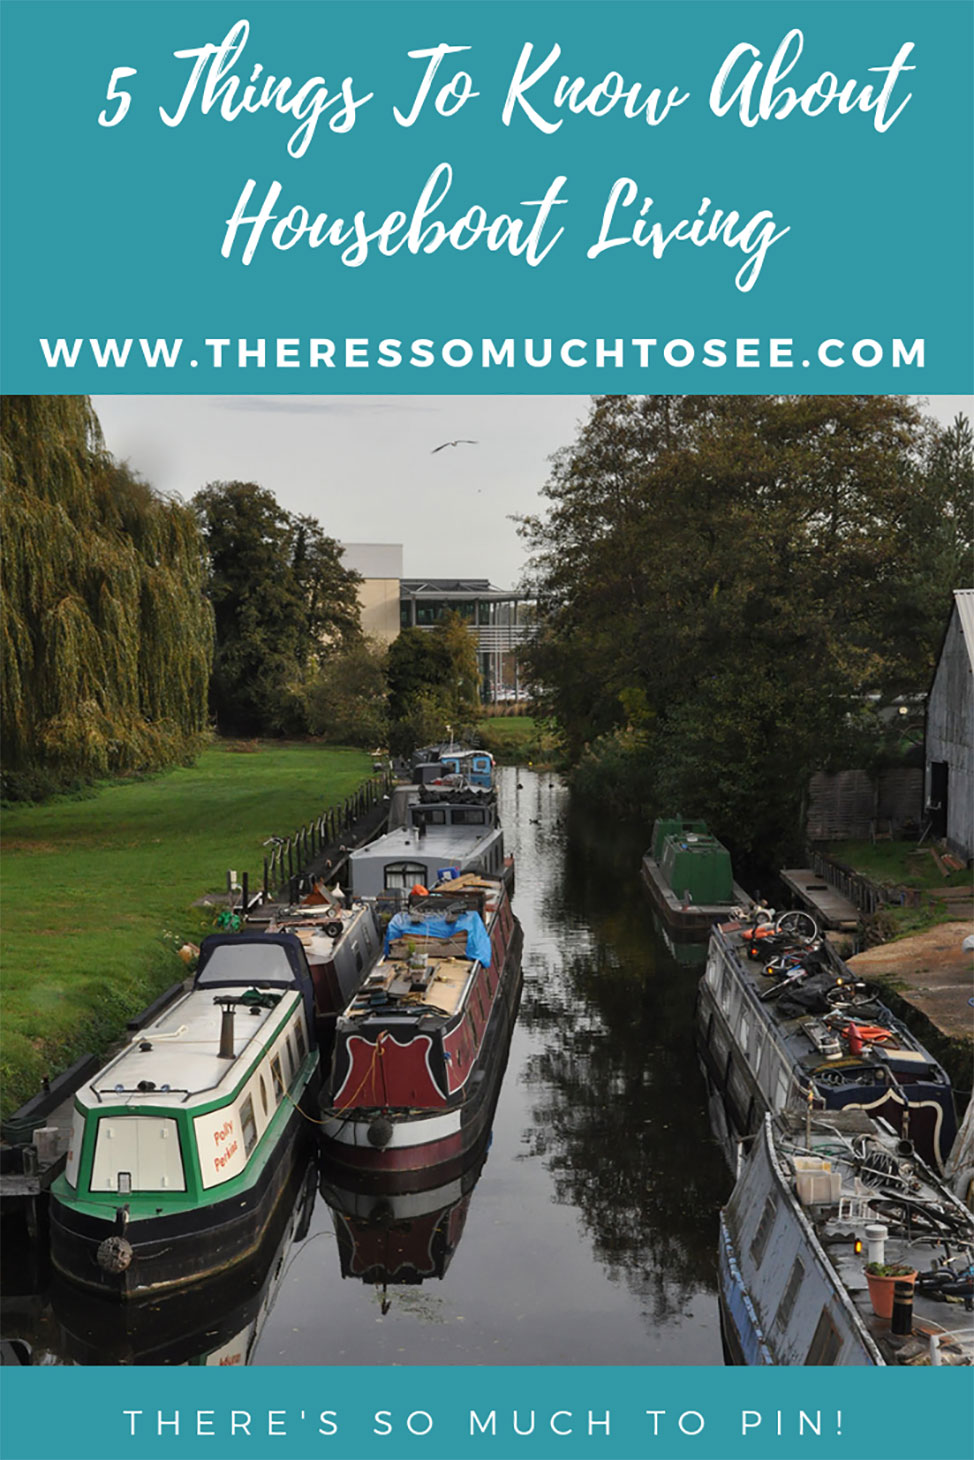 Pinnable image of house boats along the Grand Union Canal in London